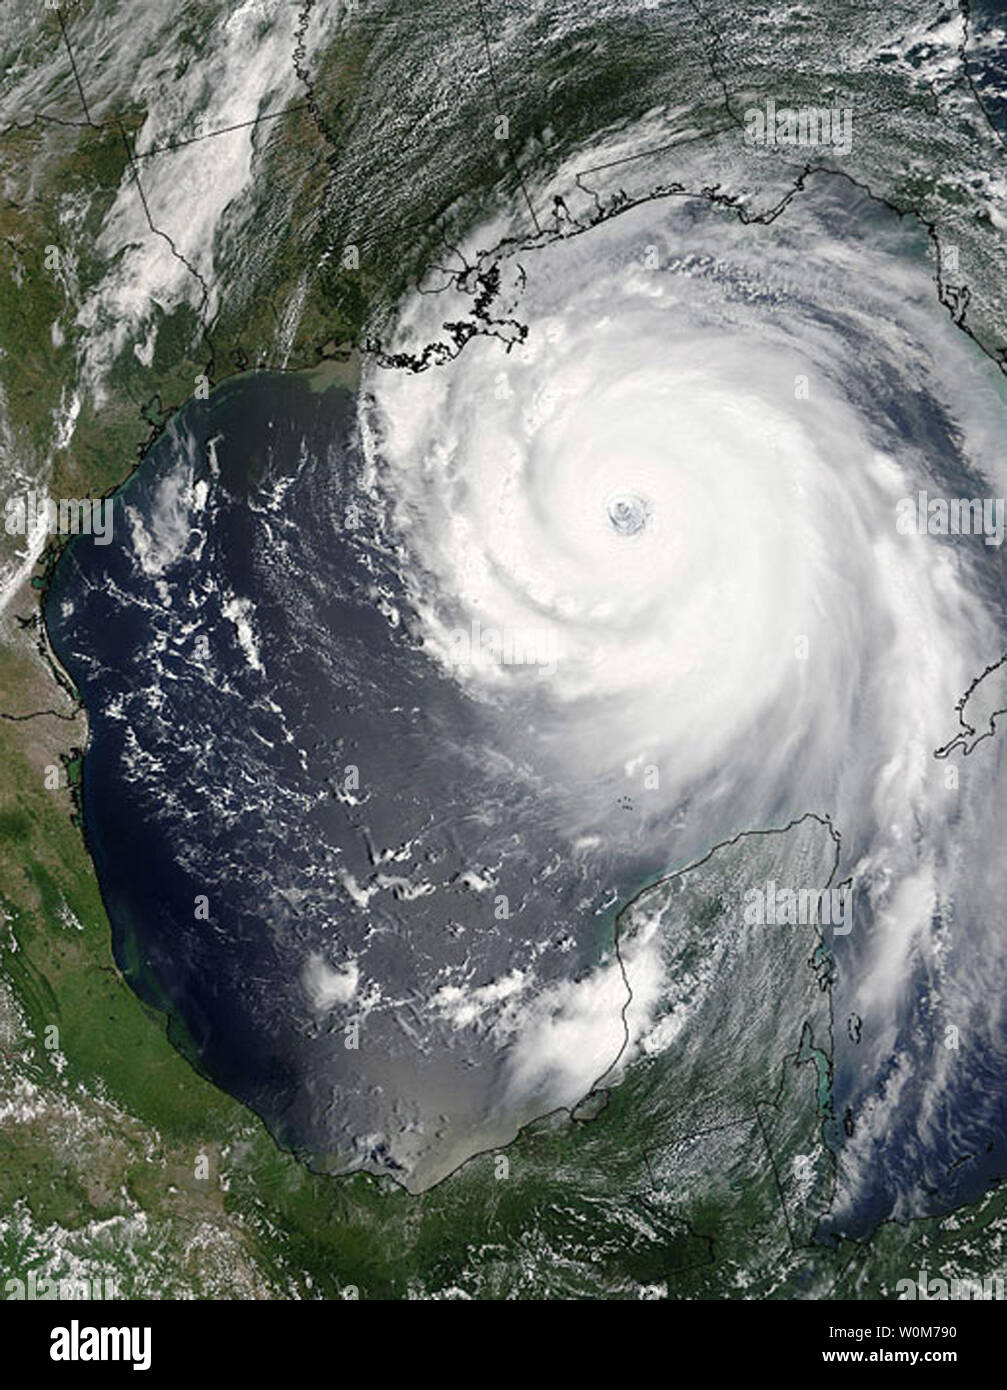 Hurricane Katrina is shown bearing down on New Orleans and the coast lines of Louisiana, Mississippi and Alabama in this NASA satellite image on Aug. 28, 2005. Katrina made landfall early on Aug. 29, and with sustained winds at 150mph and gusts of 184mph, this massive category 5 storm has already caused flooding and severe damage.   (UPI Photo/NASA ho) Stock Photo